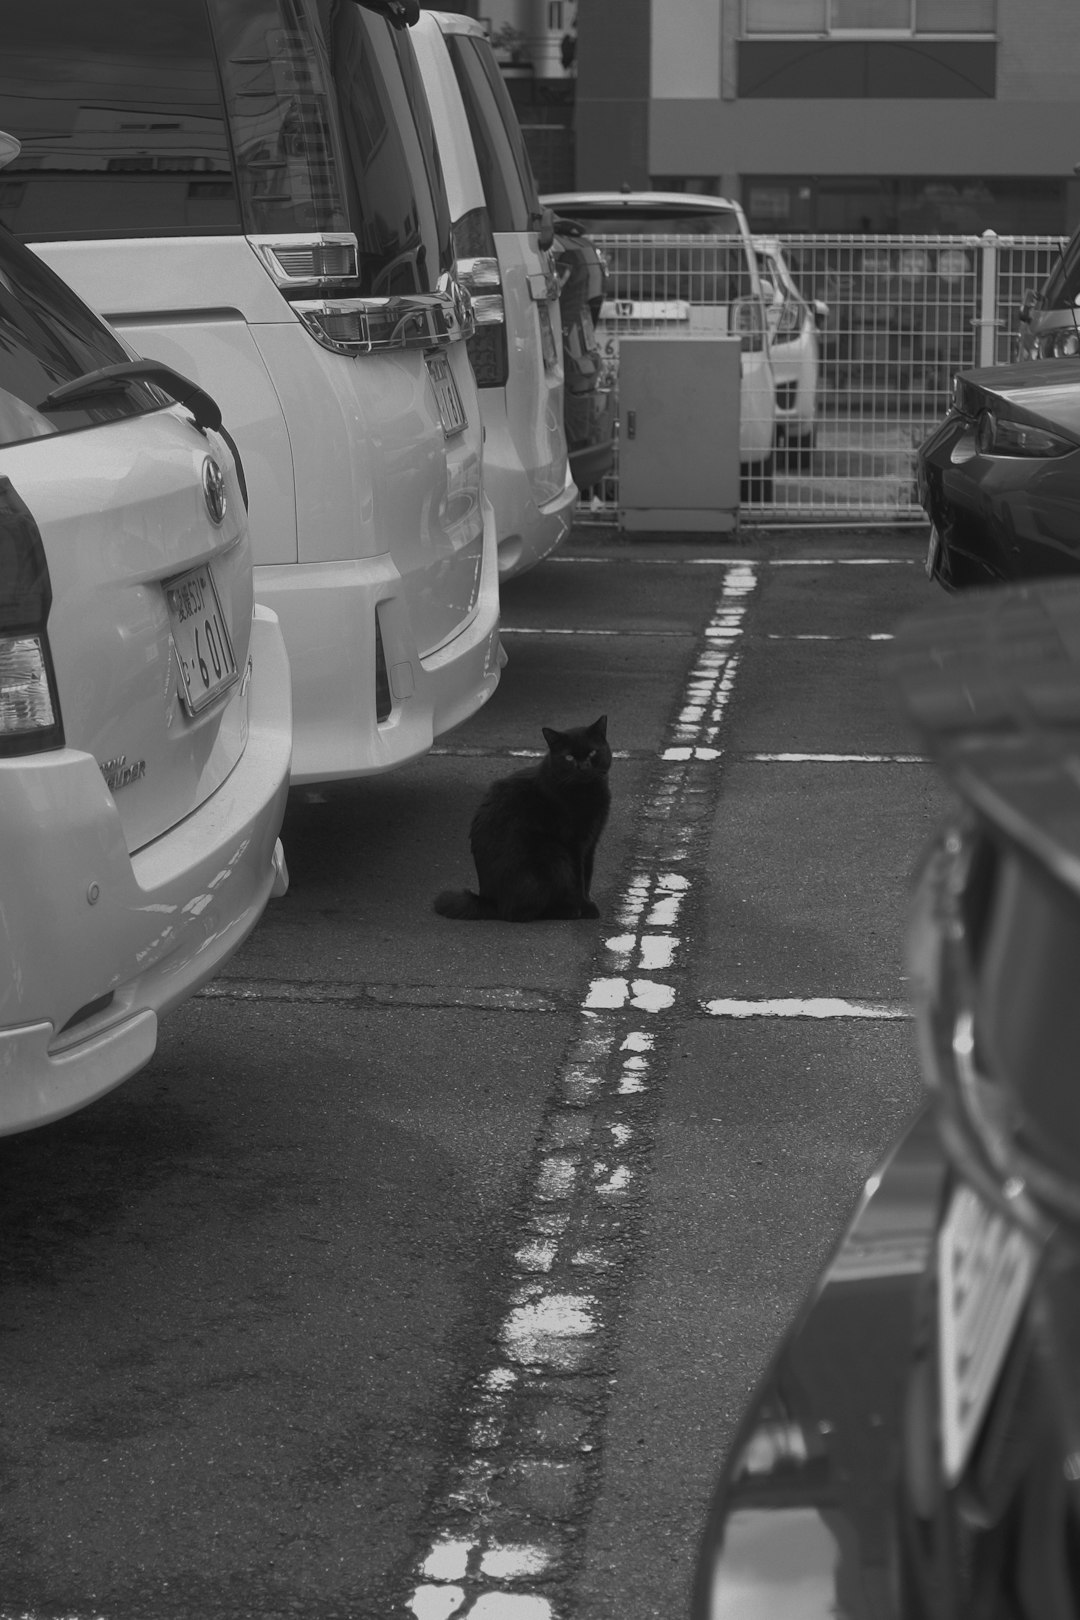 black cat on road near cars in grayscale photography